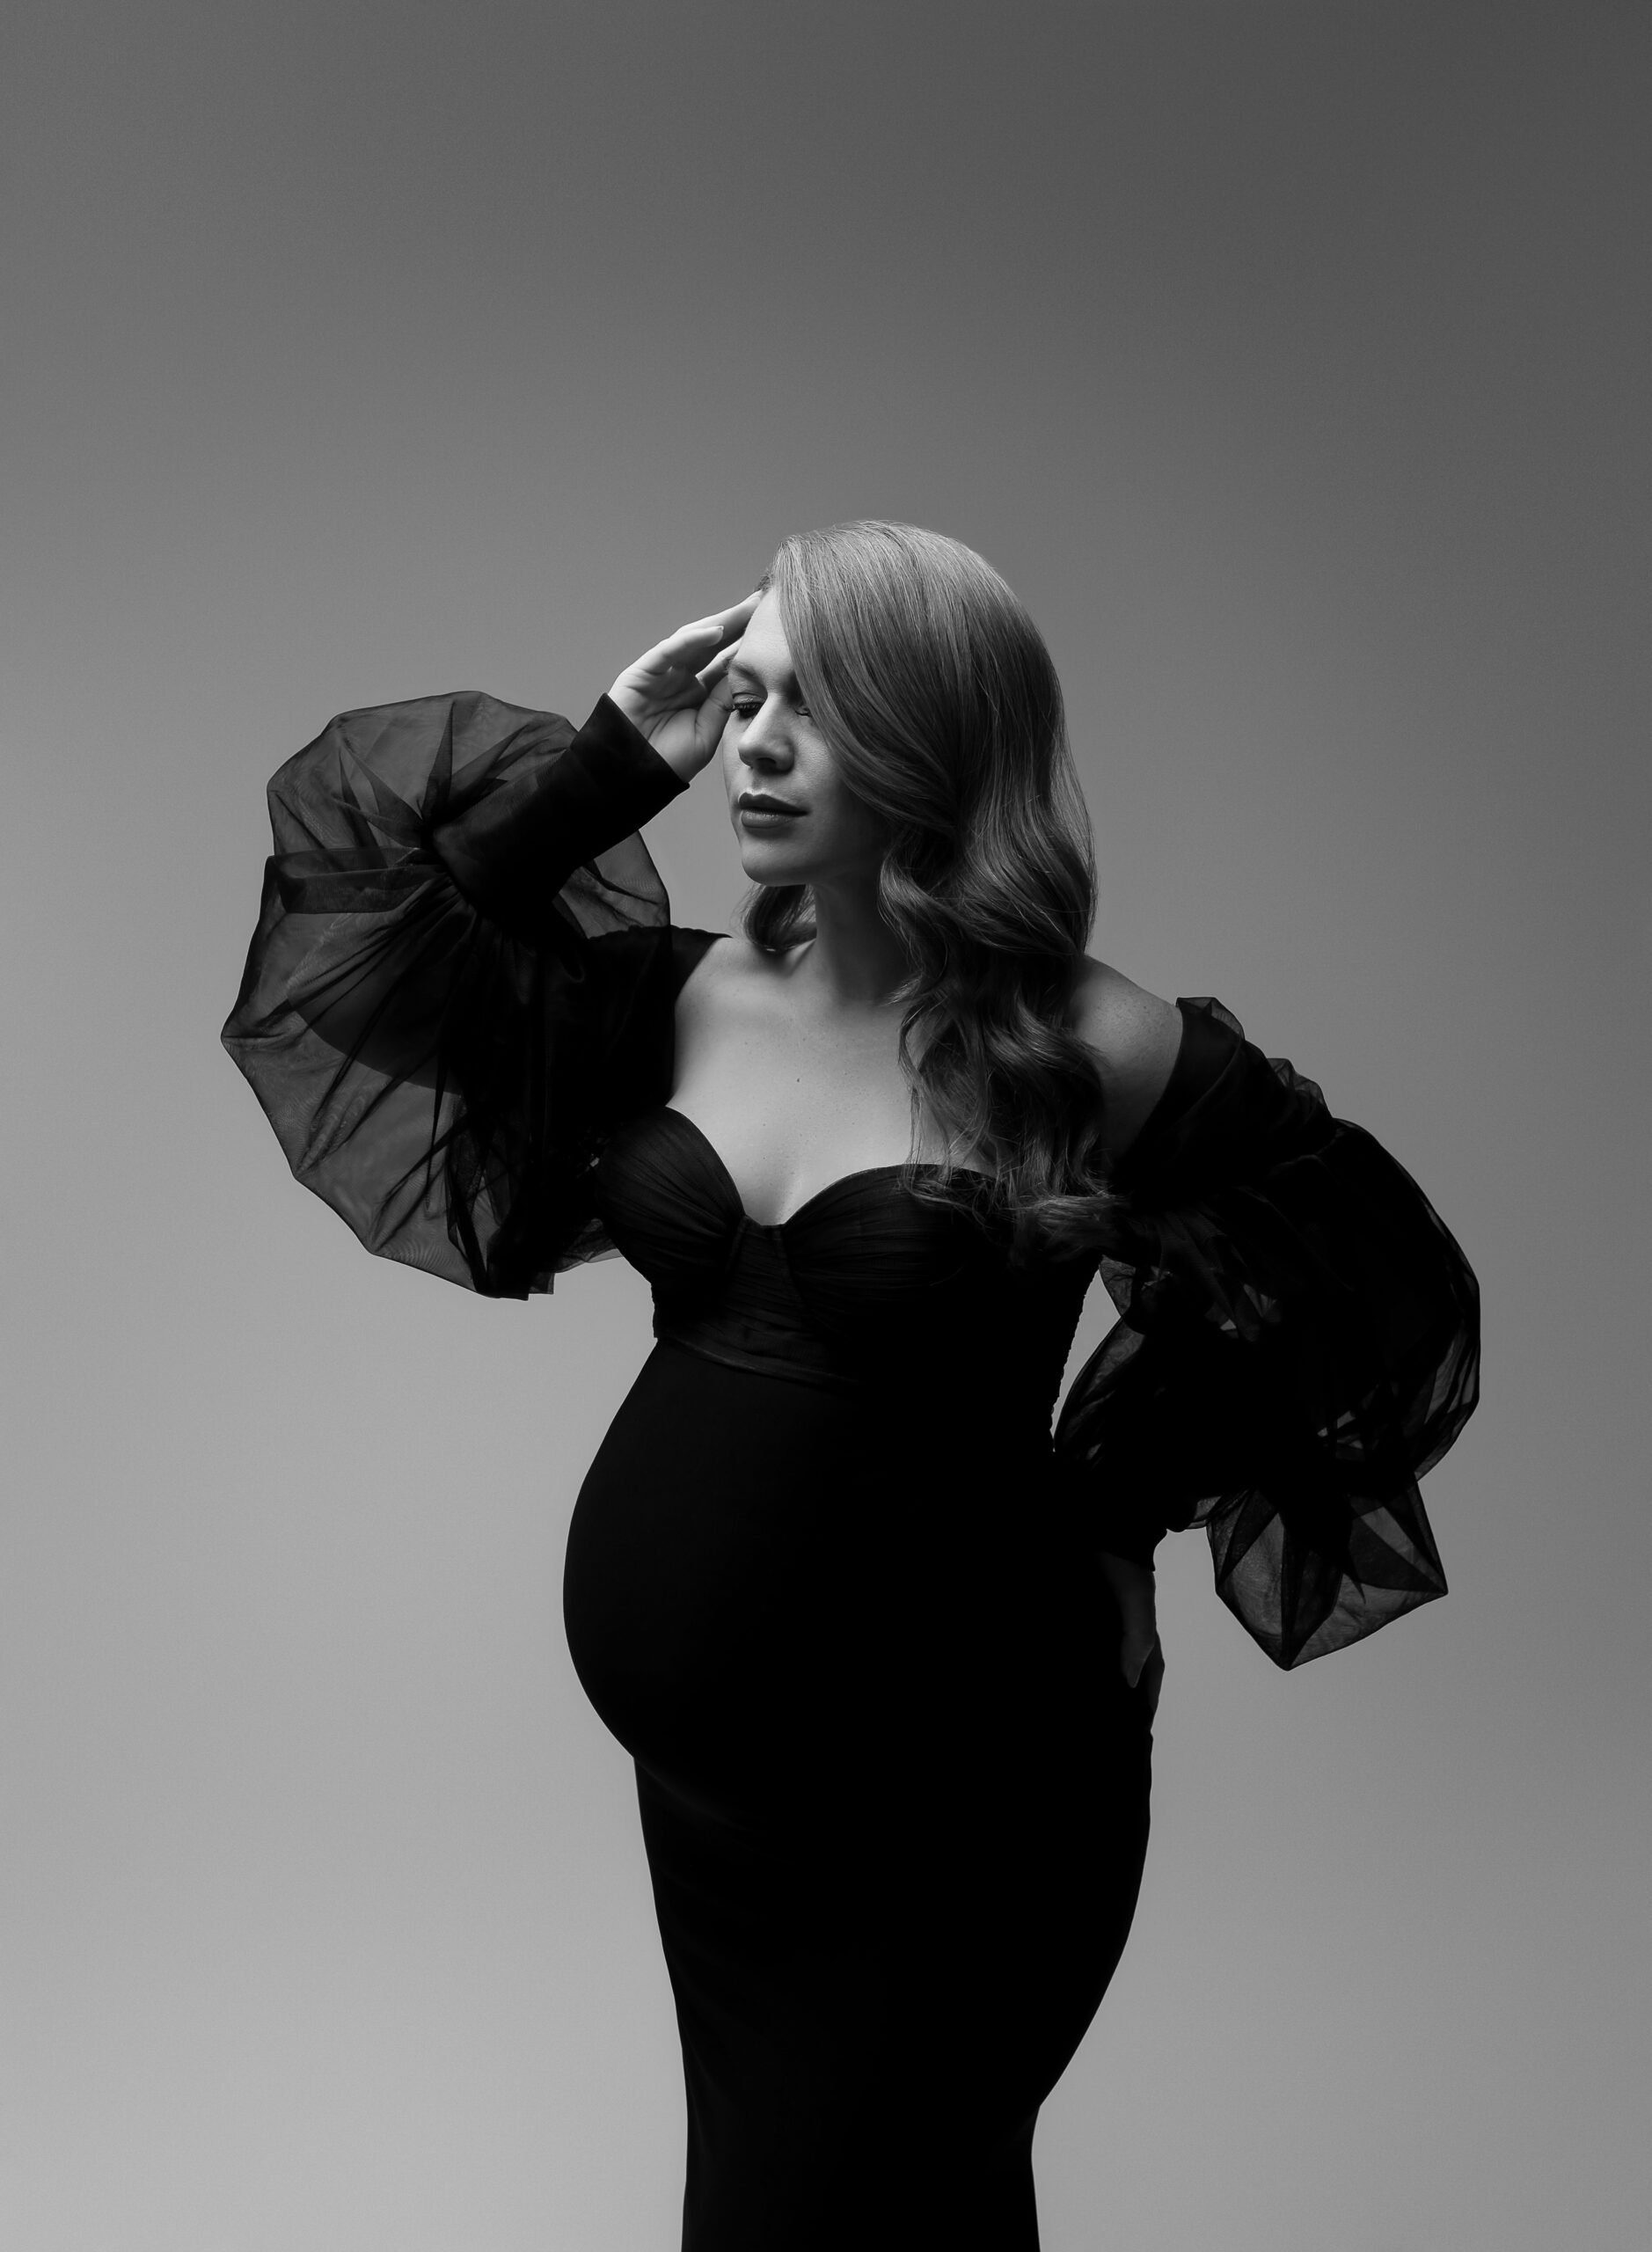 A close-up black and white maternity photo featuring a woman in a black maternity gown with puff sleeves.